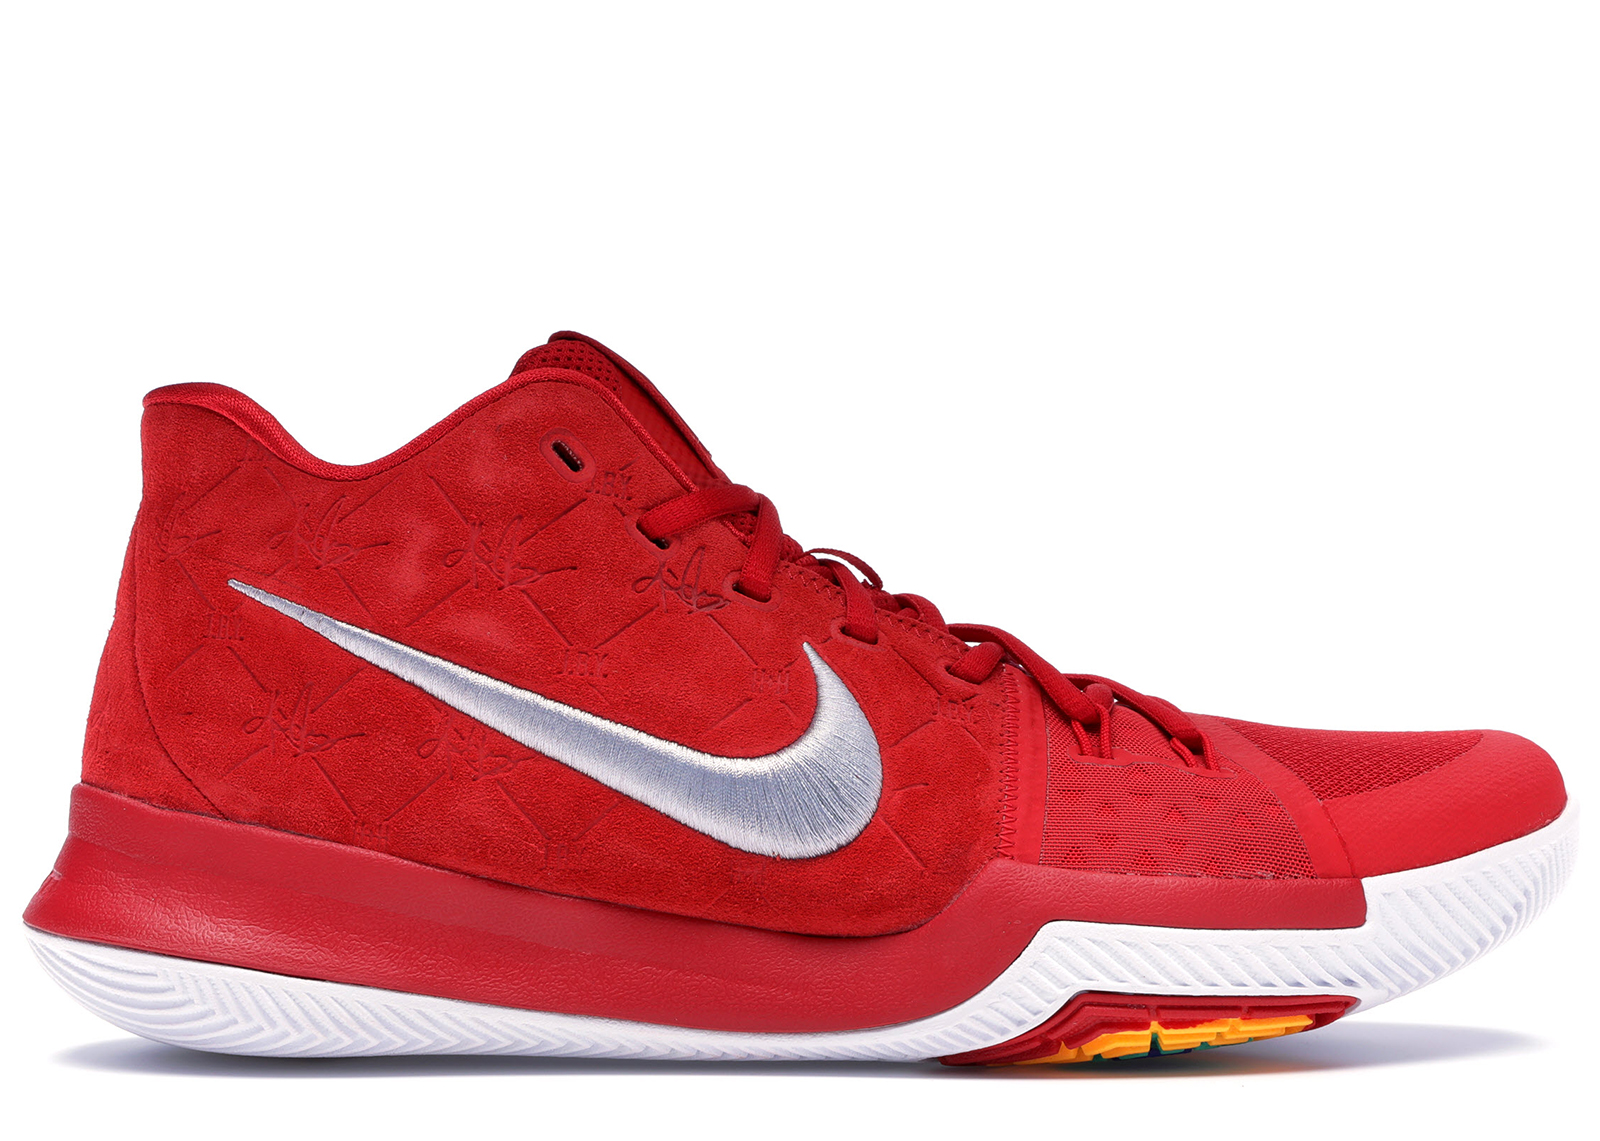 kyrie irving sneakers red